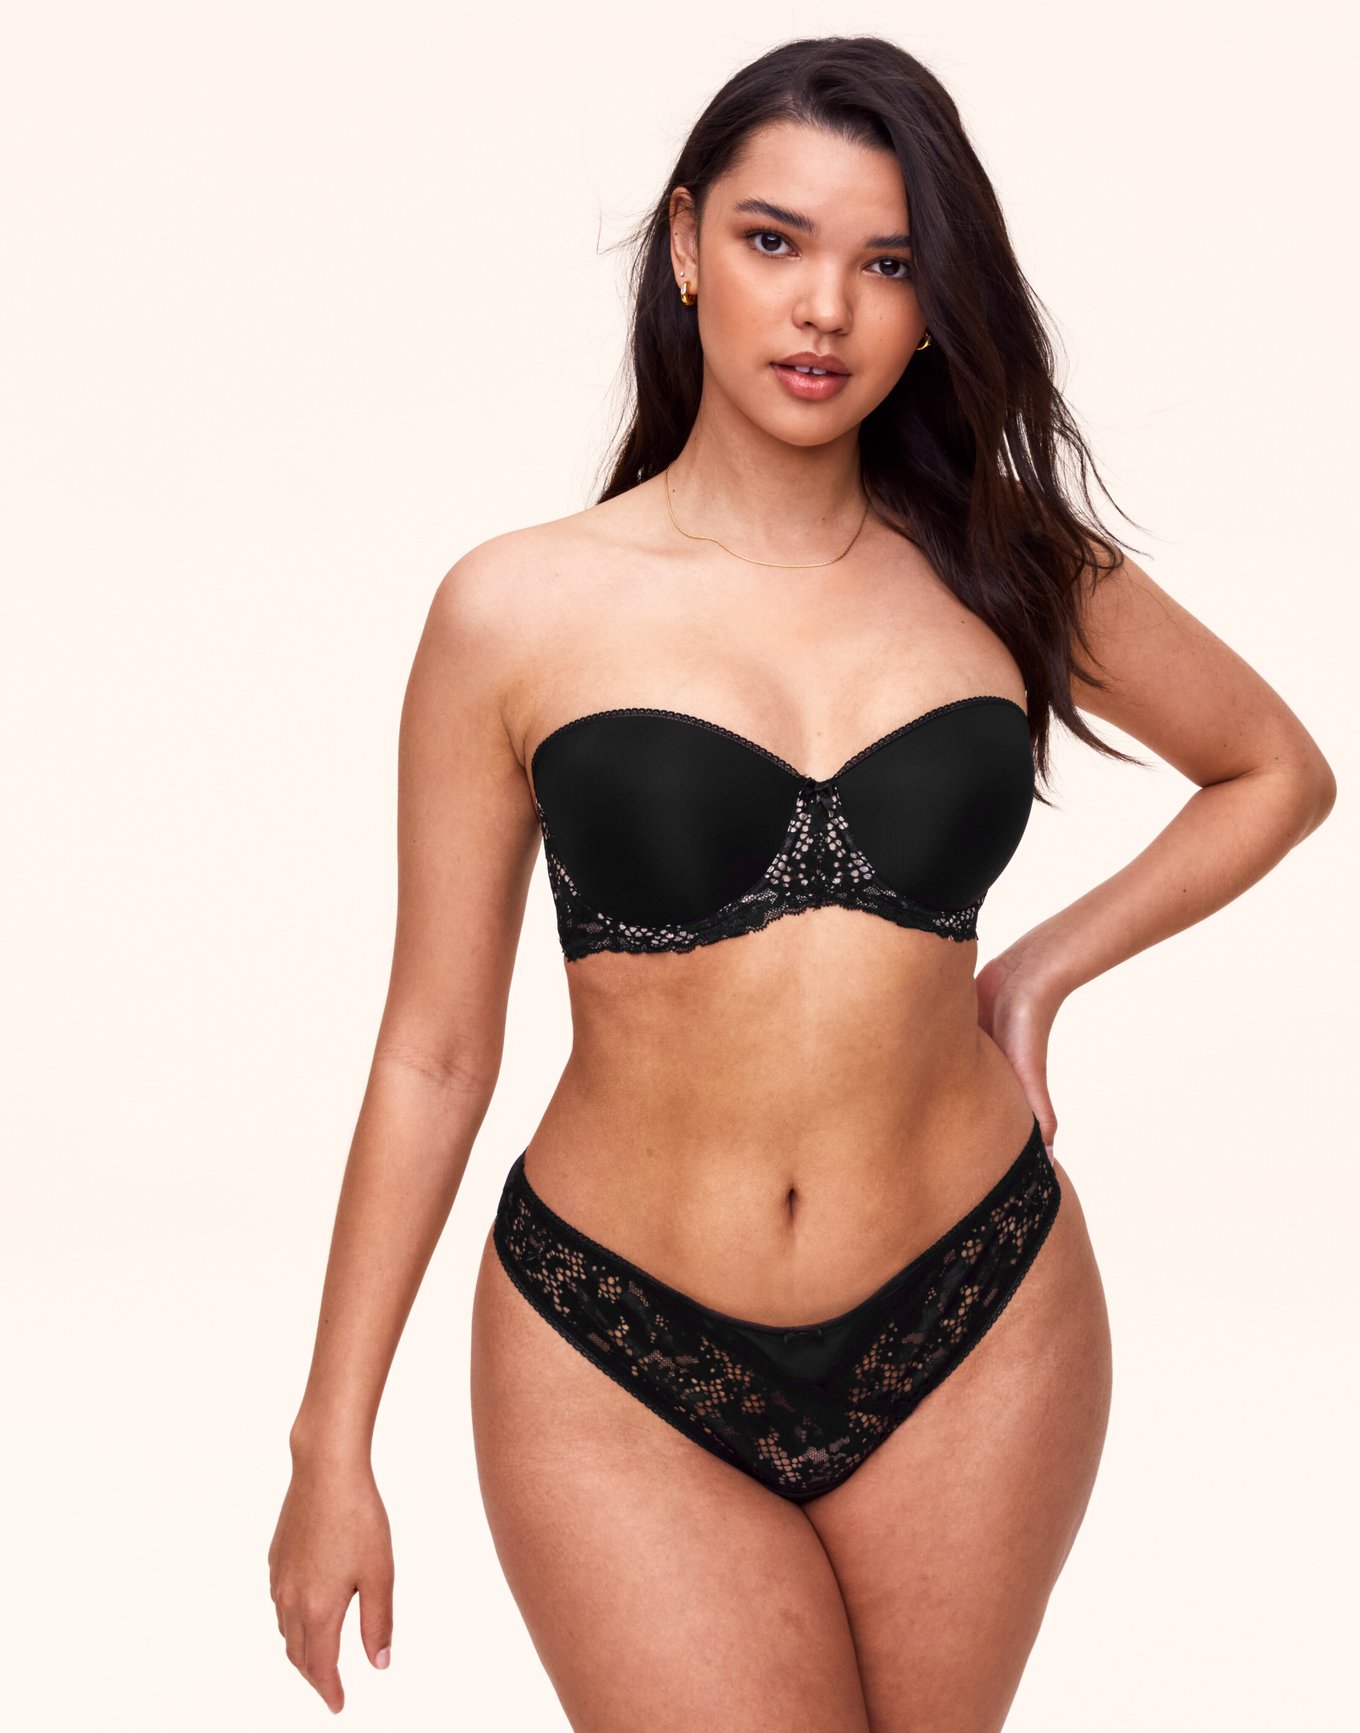 Plus-Size Strapless Bras Shopping Guide